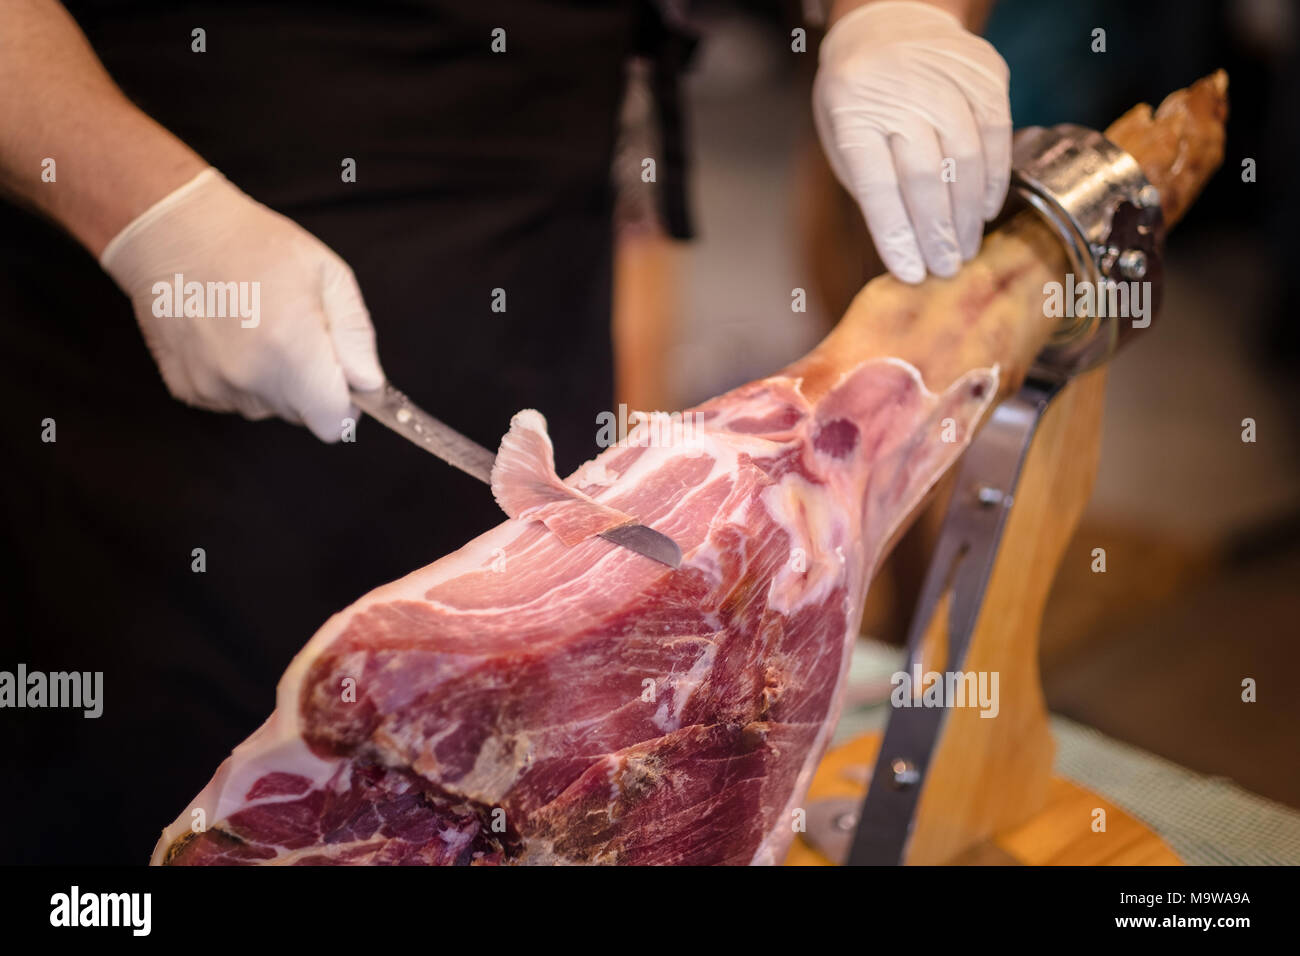 A front leg of Serrano ham also known as Spanish Iberian ham or Pata Negra mounted on a wooden stand with a butcher cutting slices of it Stock Photo